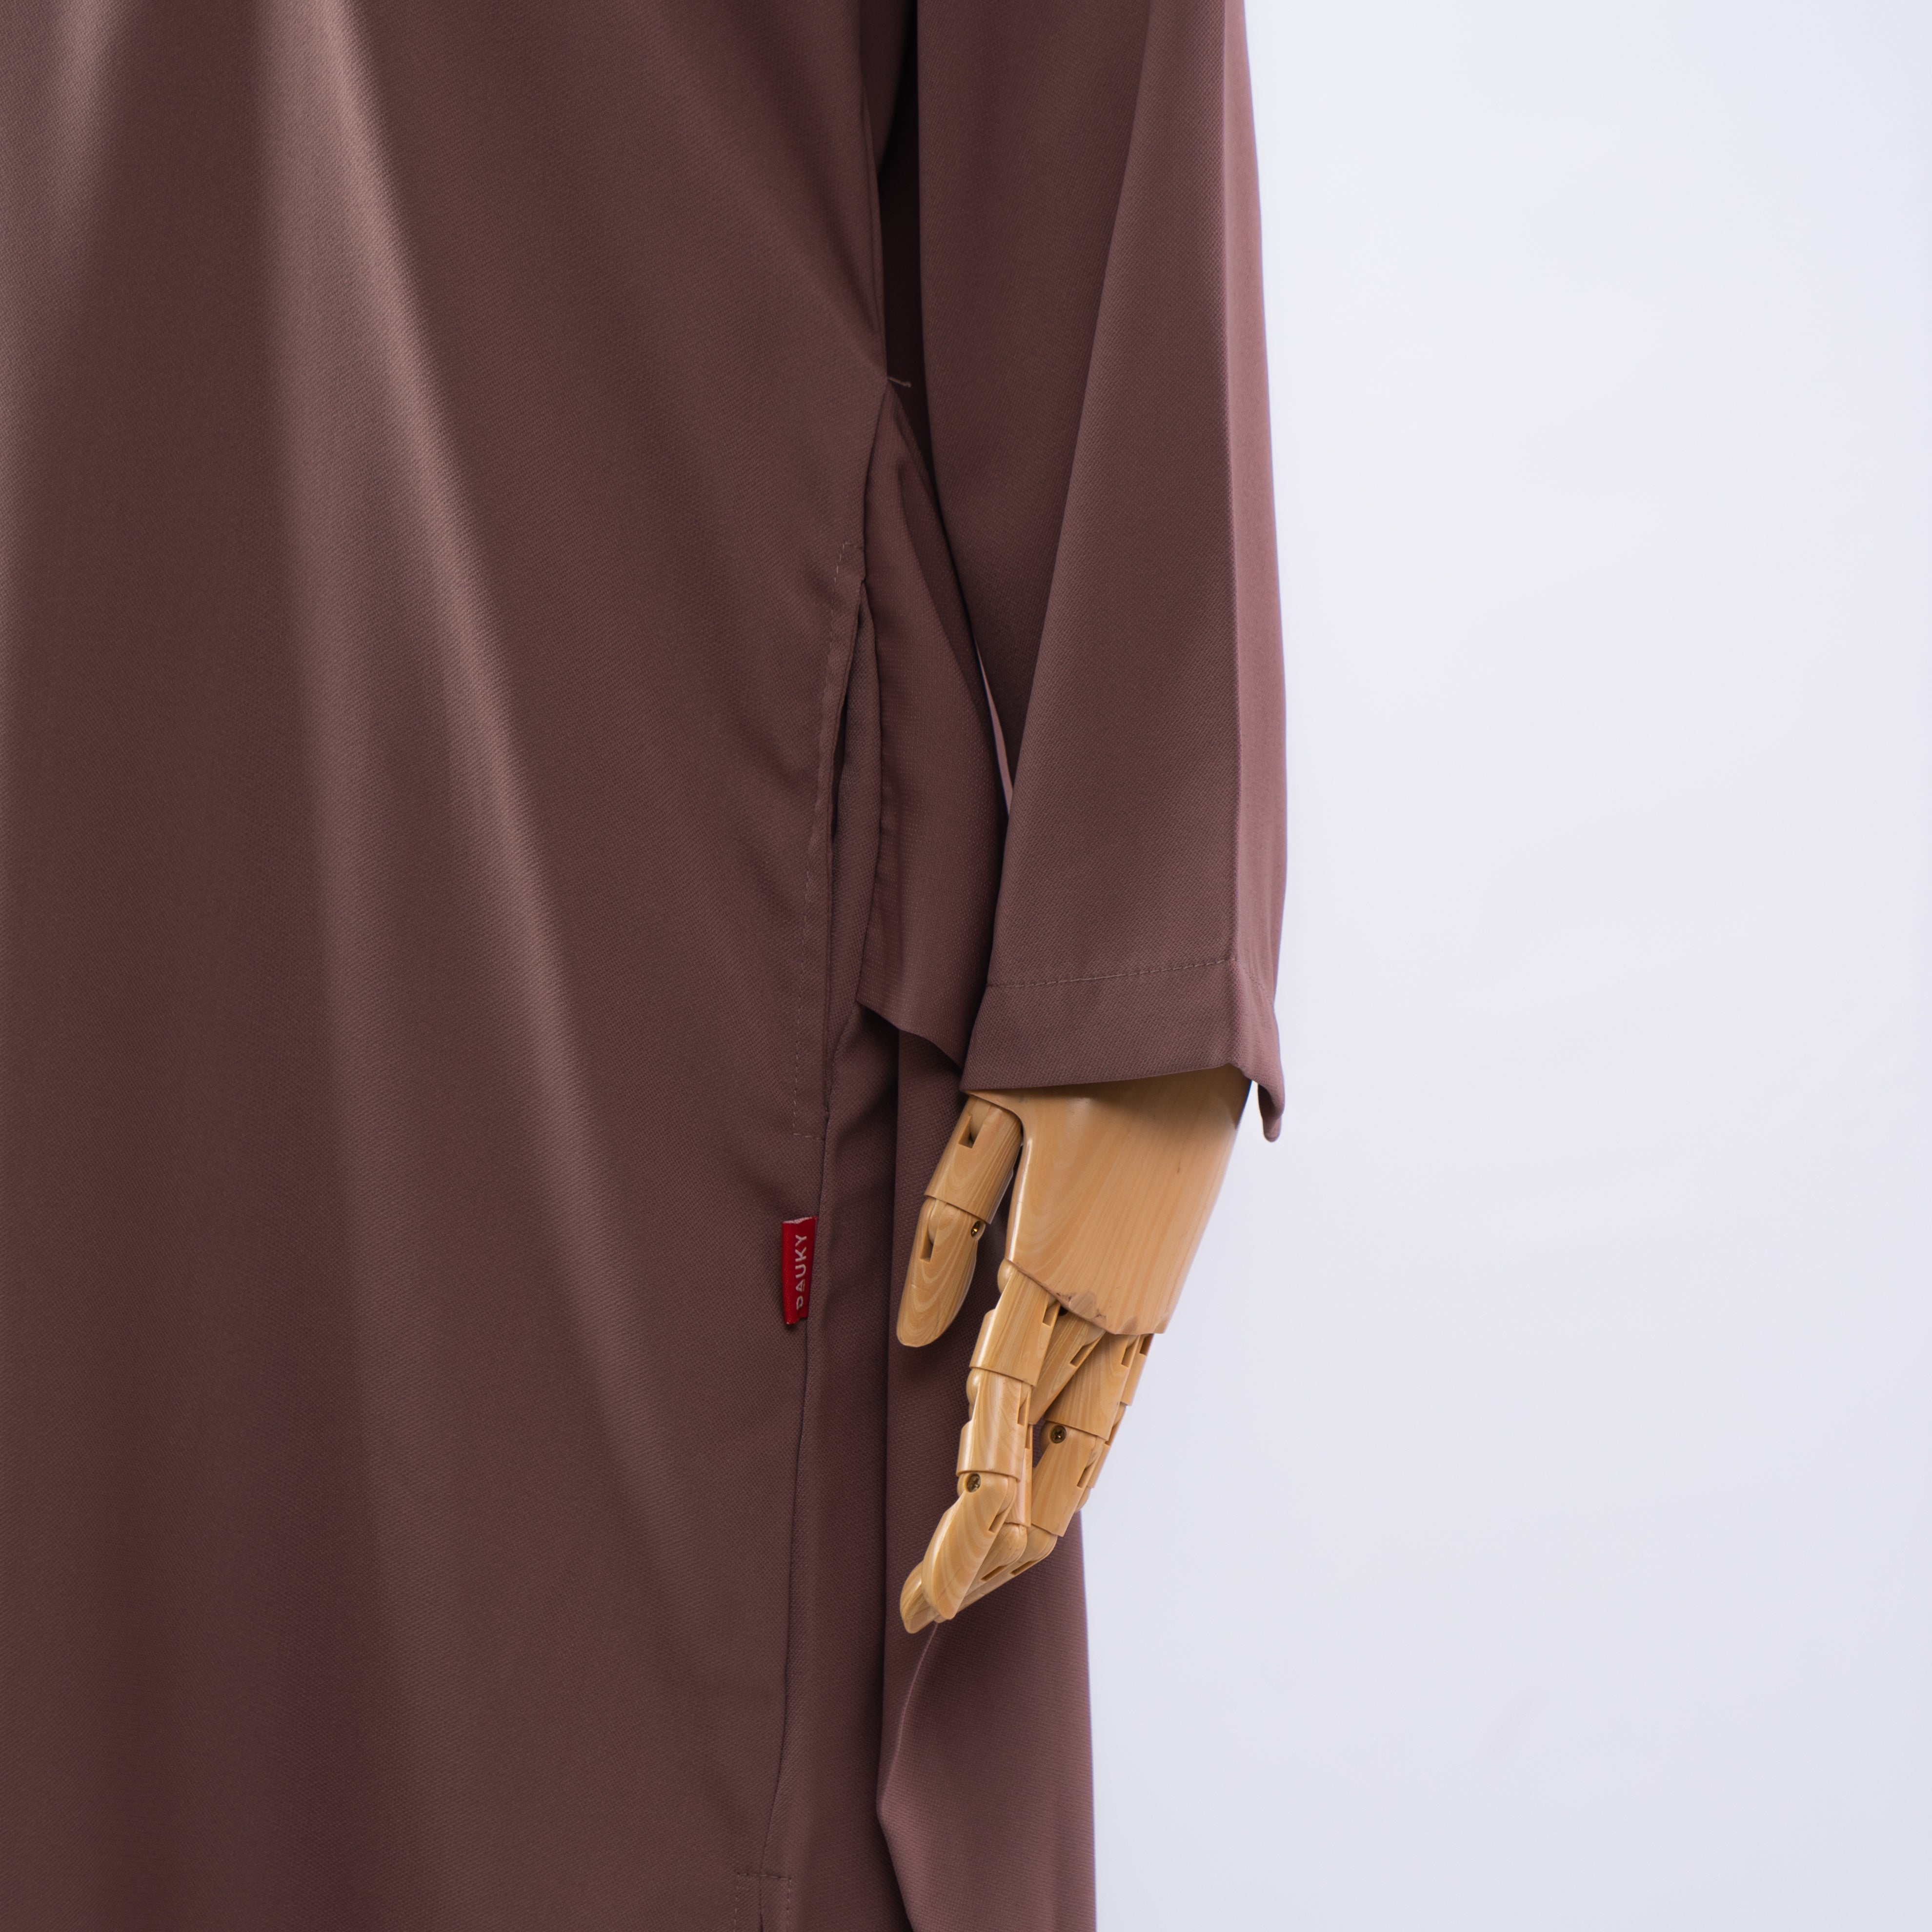 Dauky Gamis Limited Edition 34